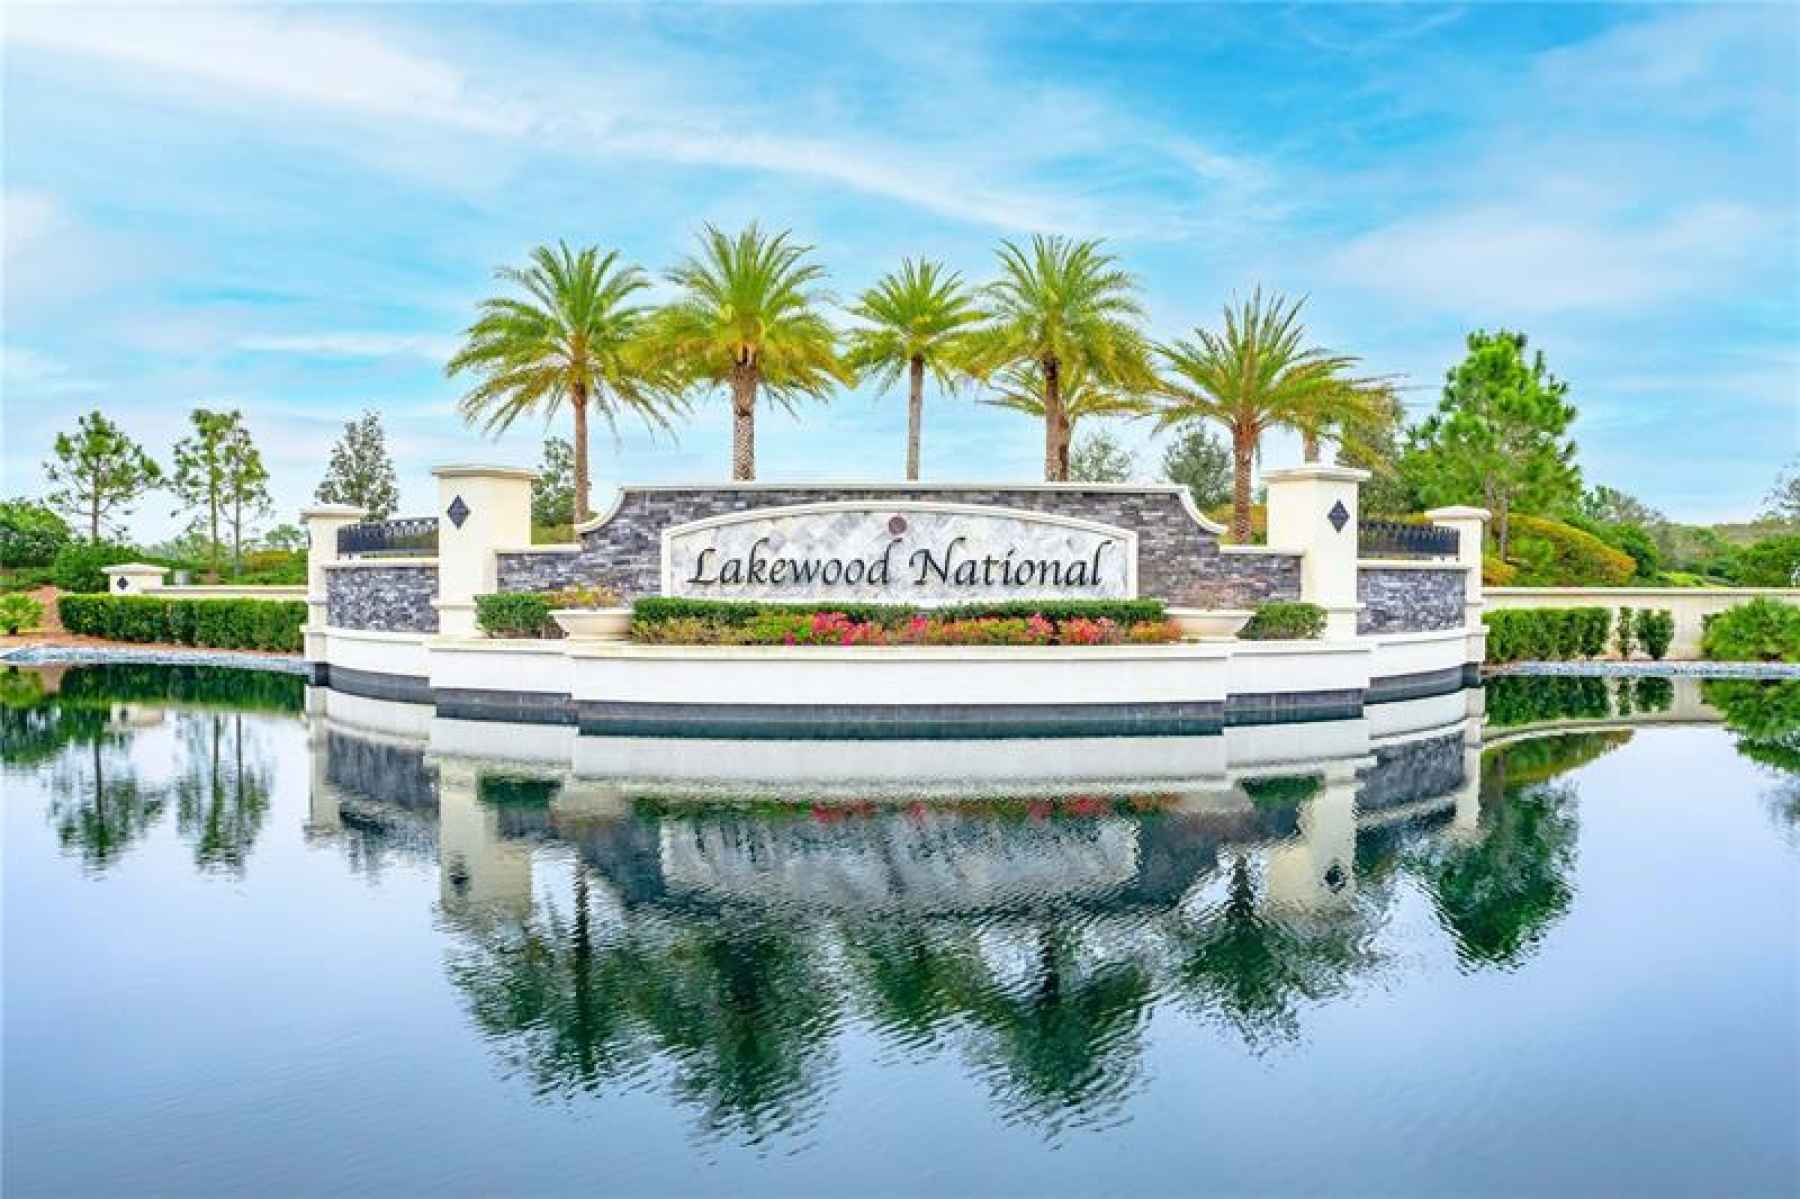 Lakewood National sign from main road.